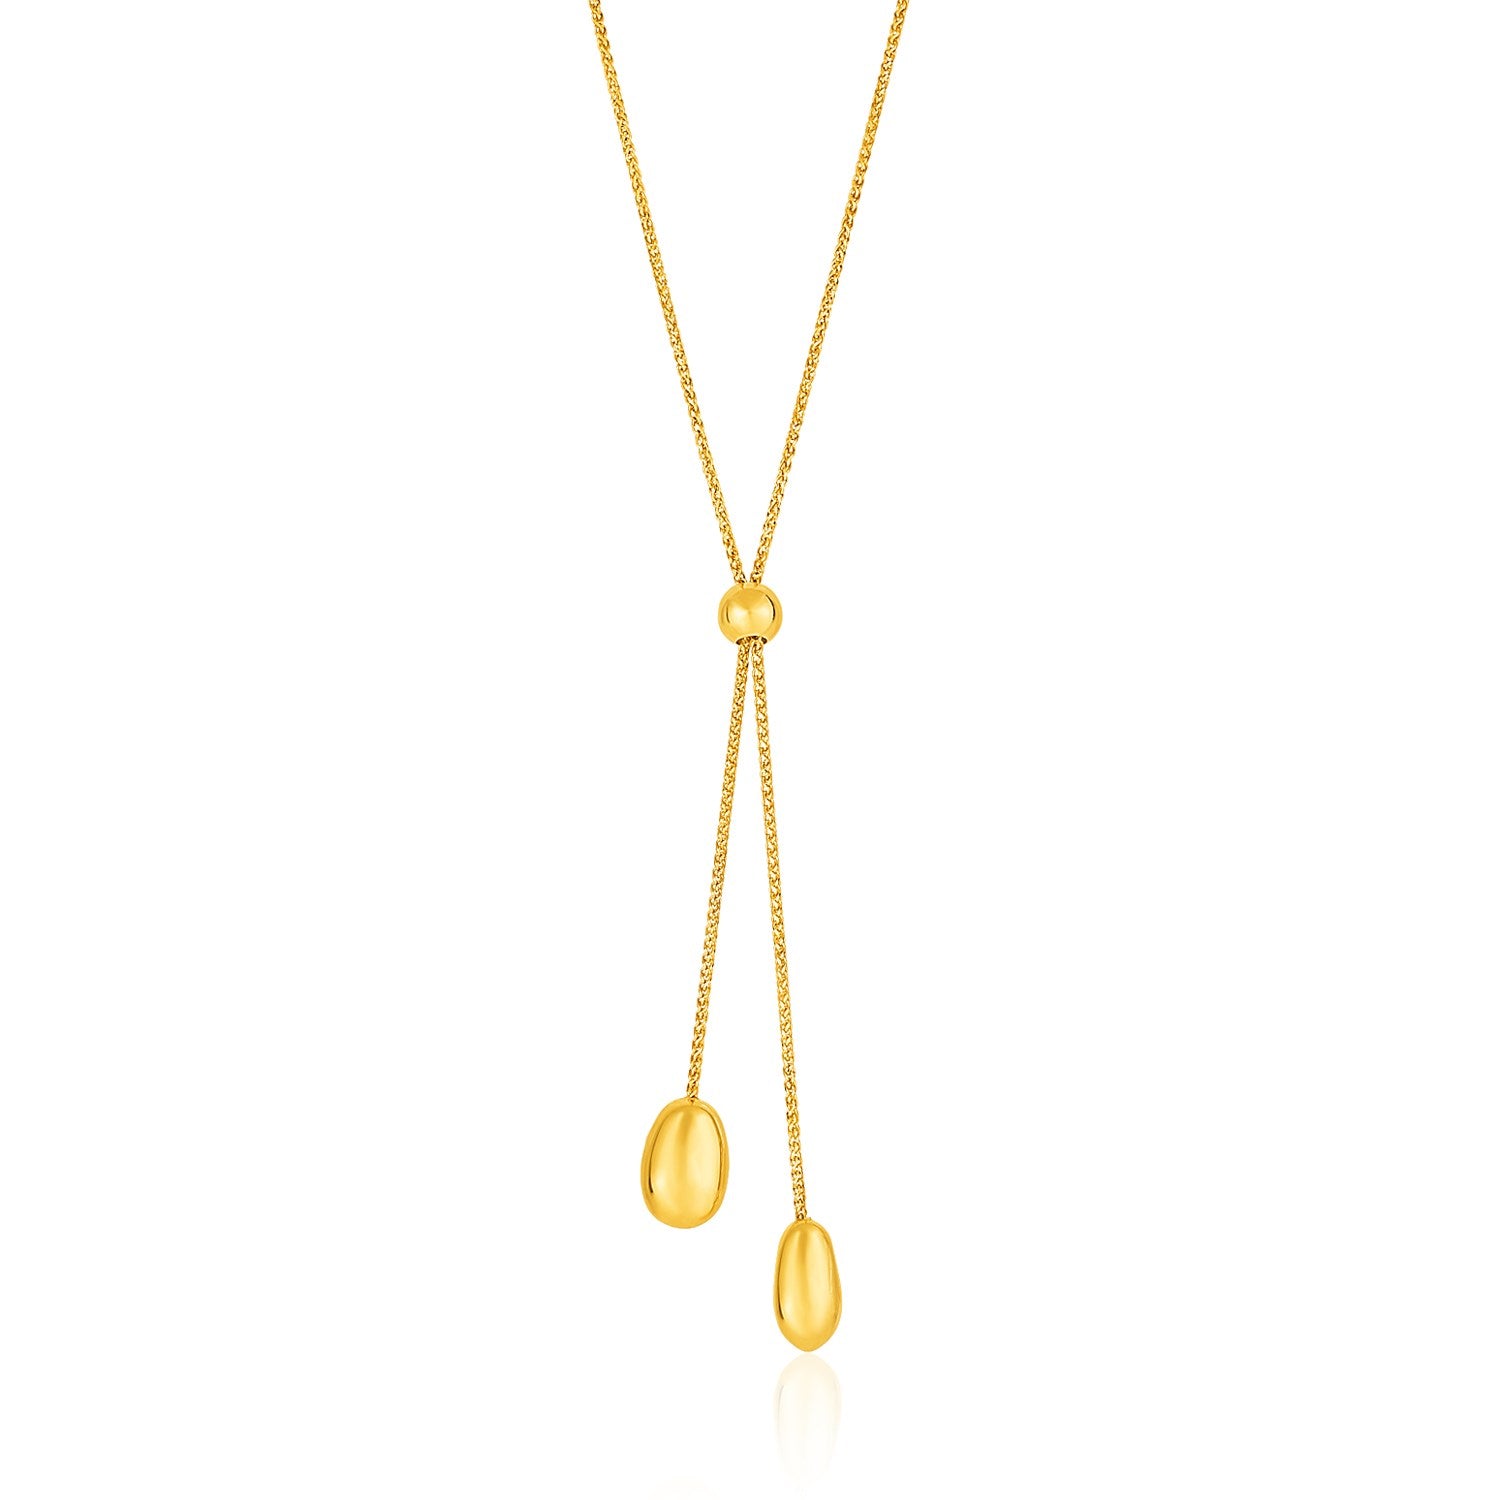 14k Yellow Gold Textured Lariat Necklace with Rounded Beads